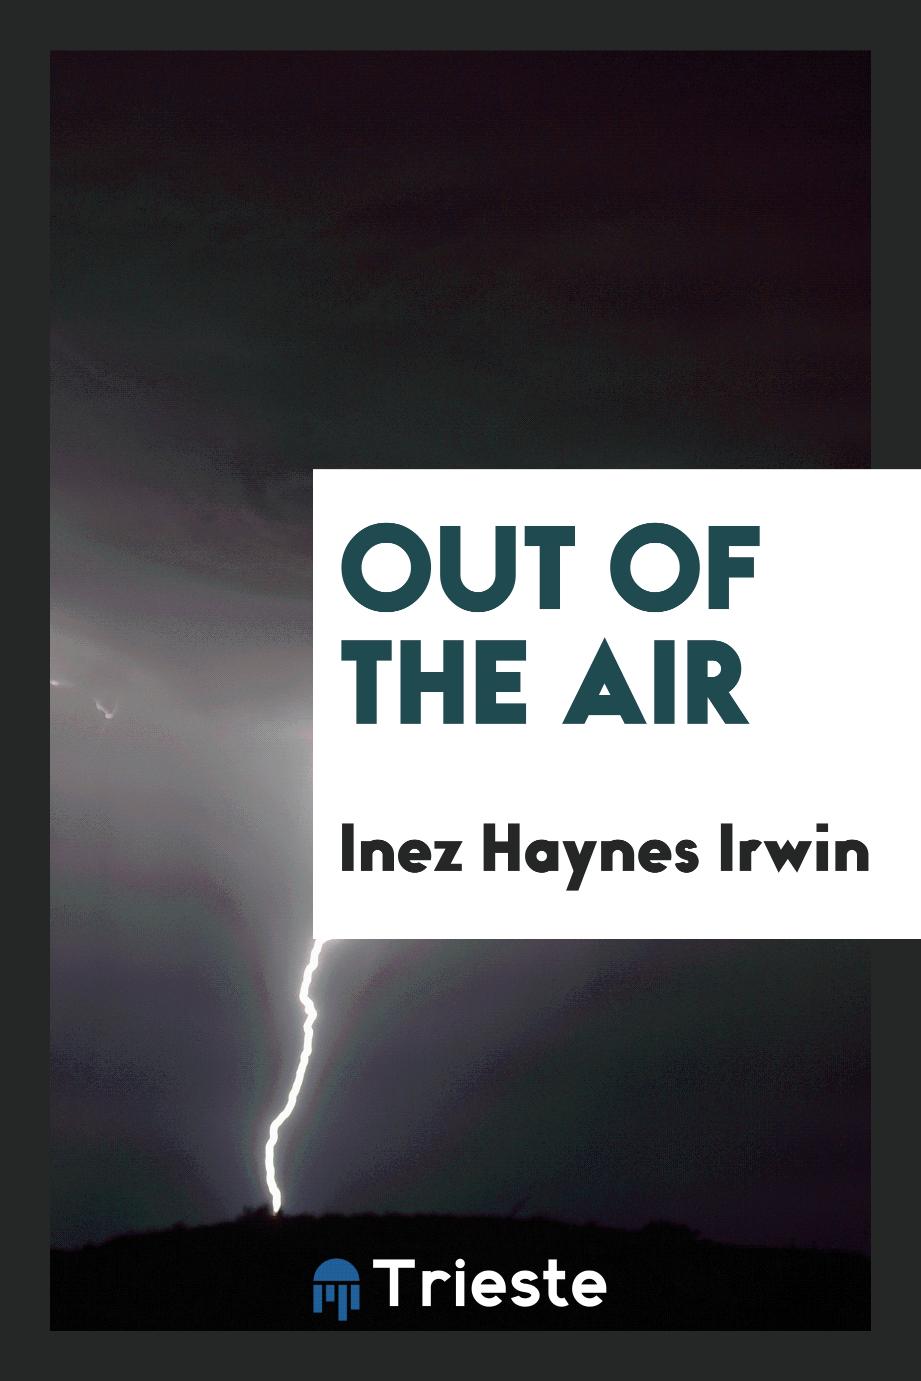 Out of the air